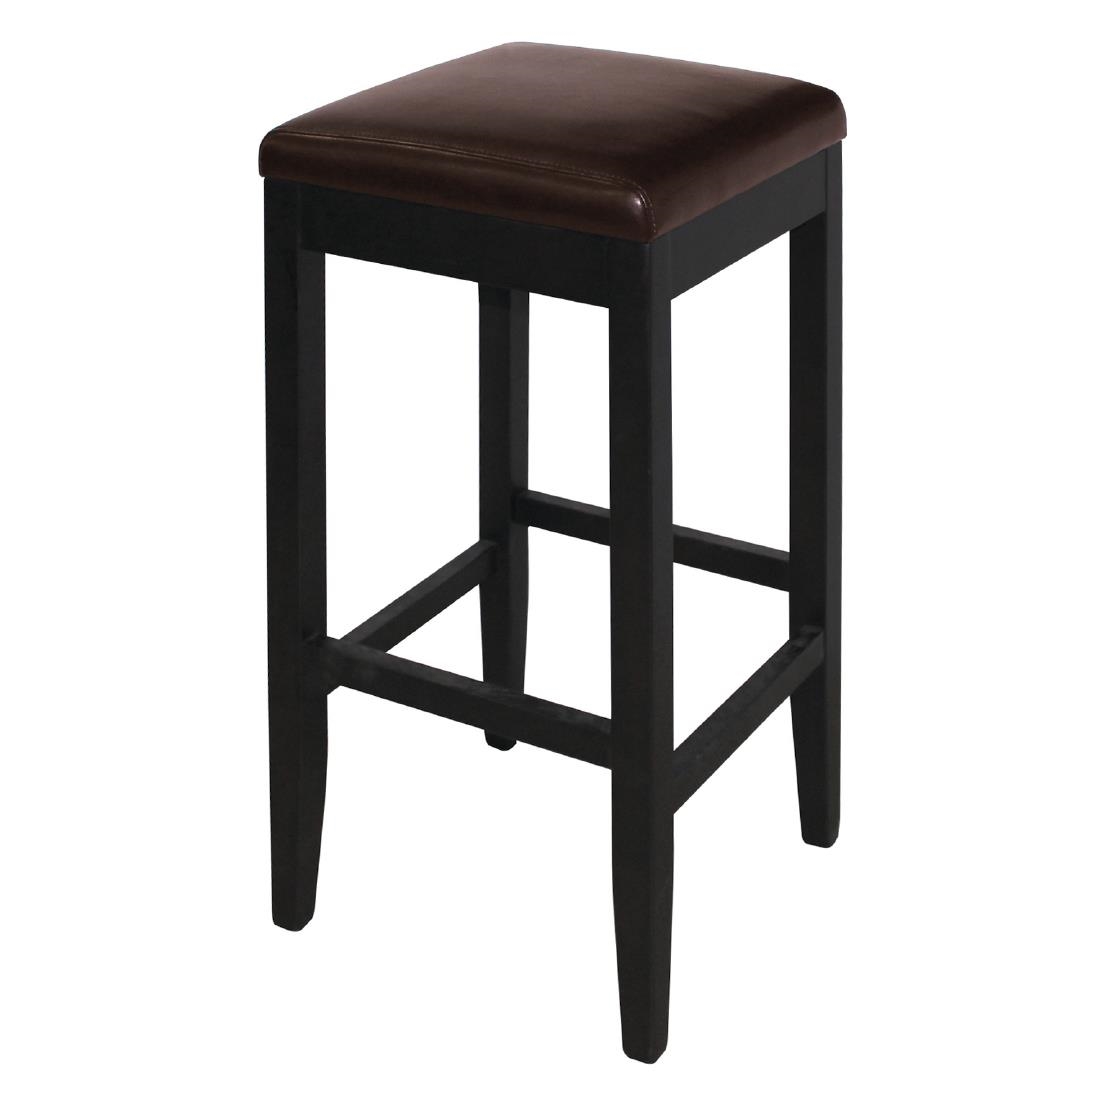 Faux Leather High Stool - Dark Brown